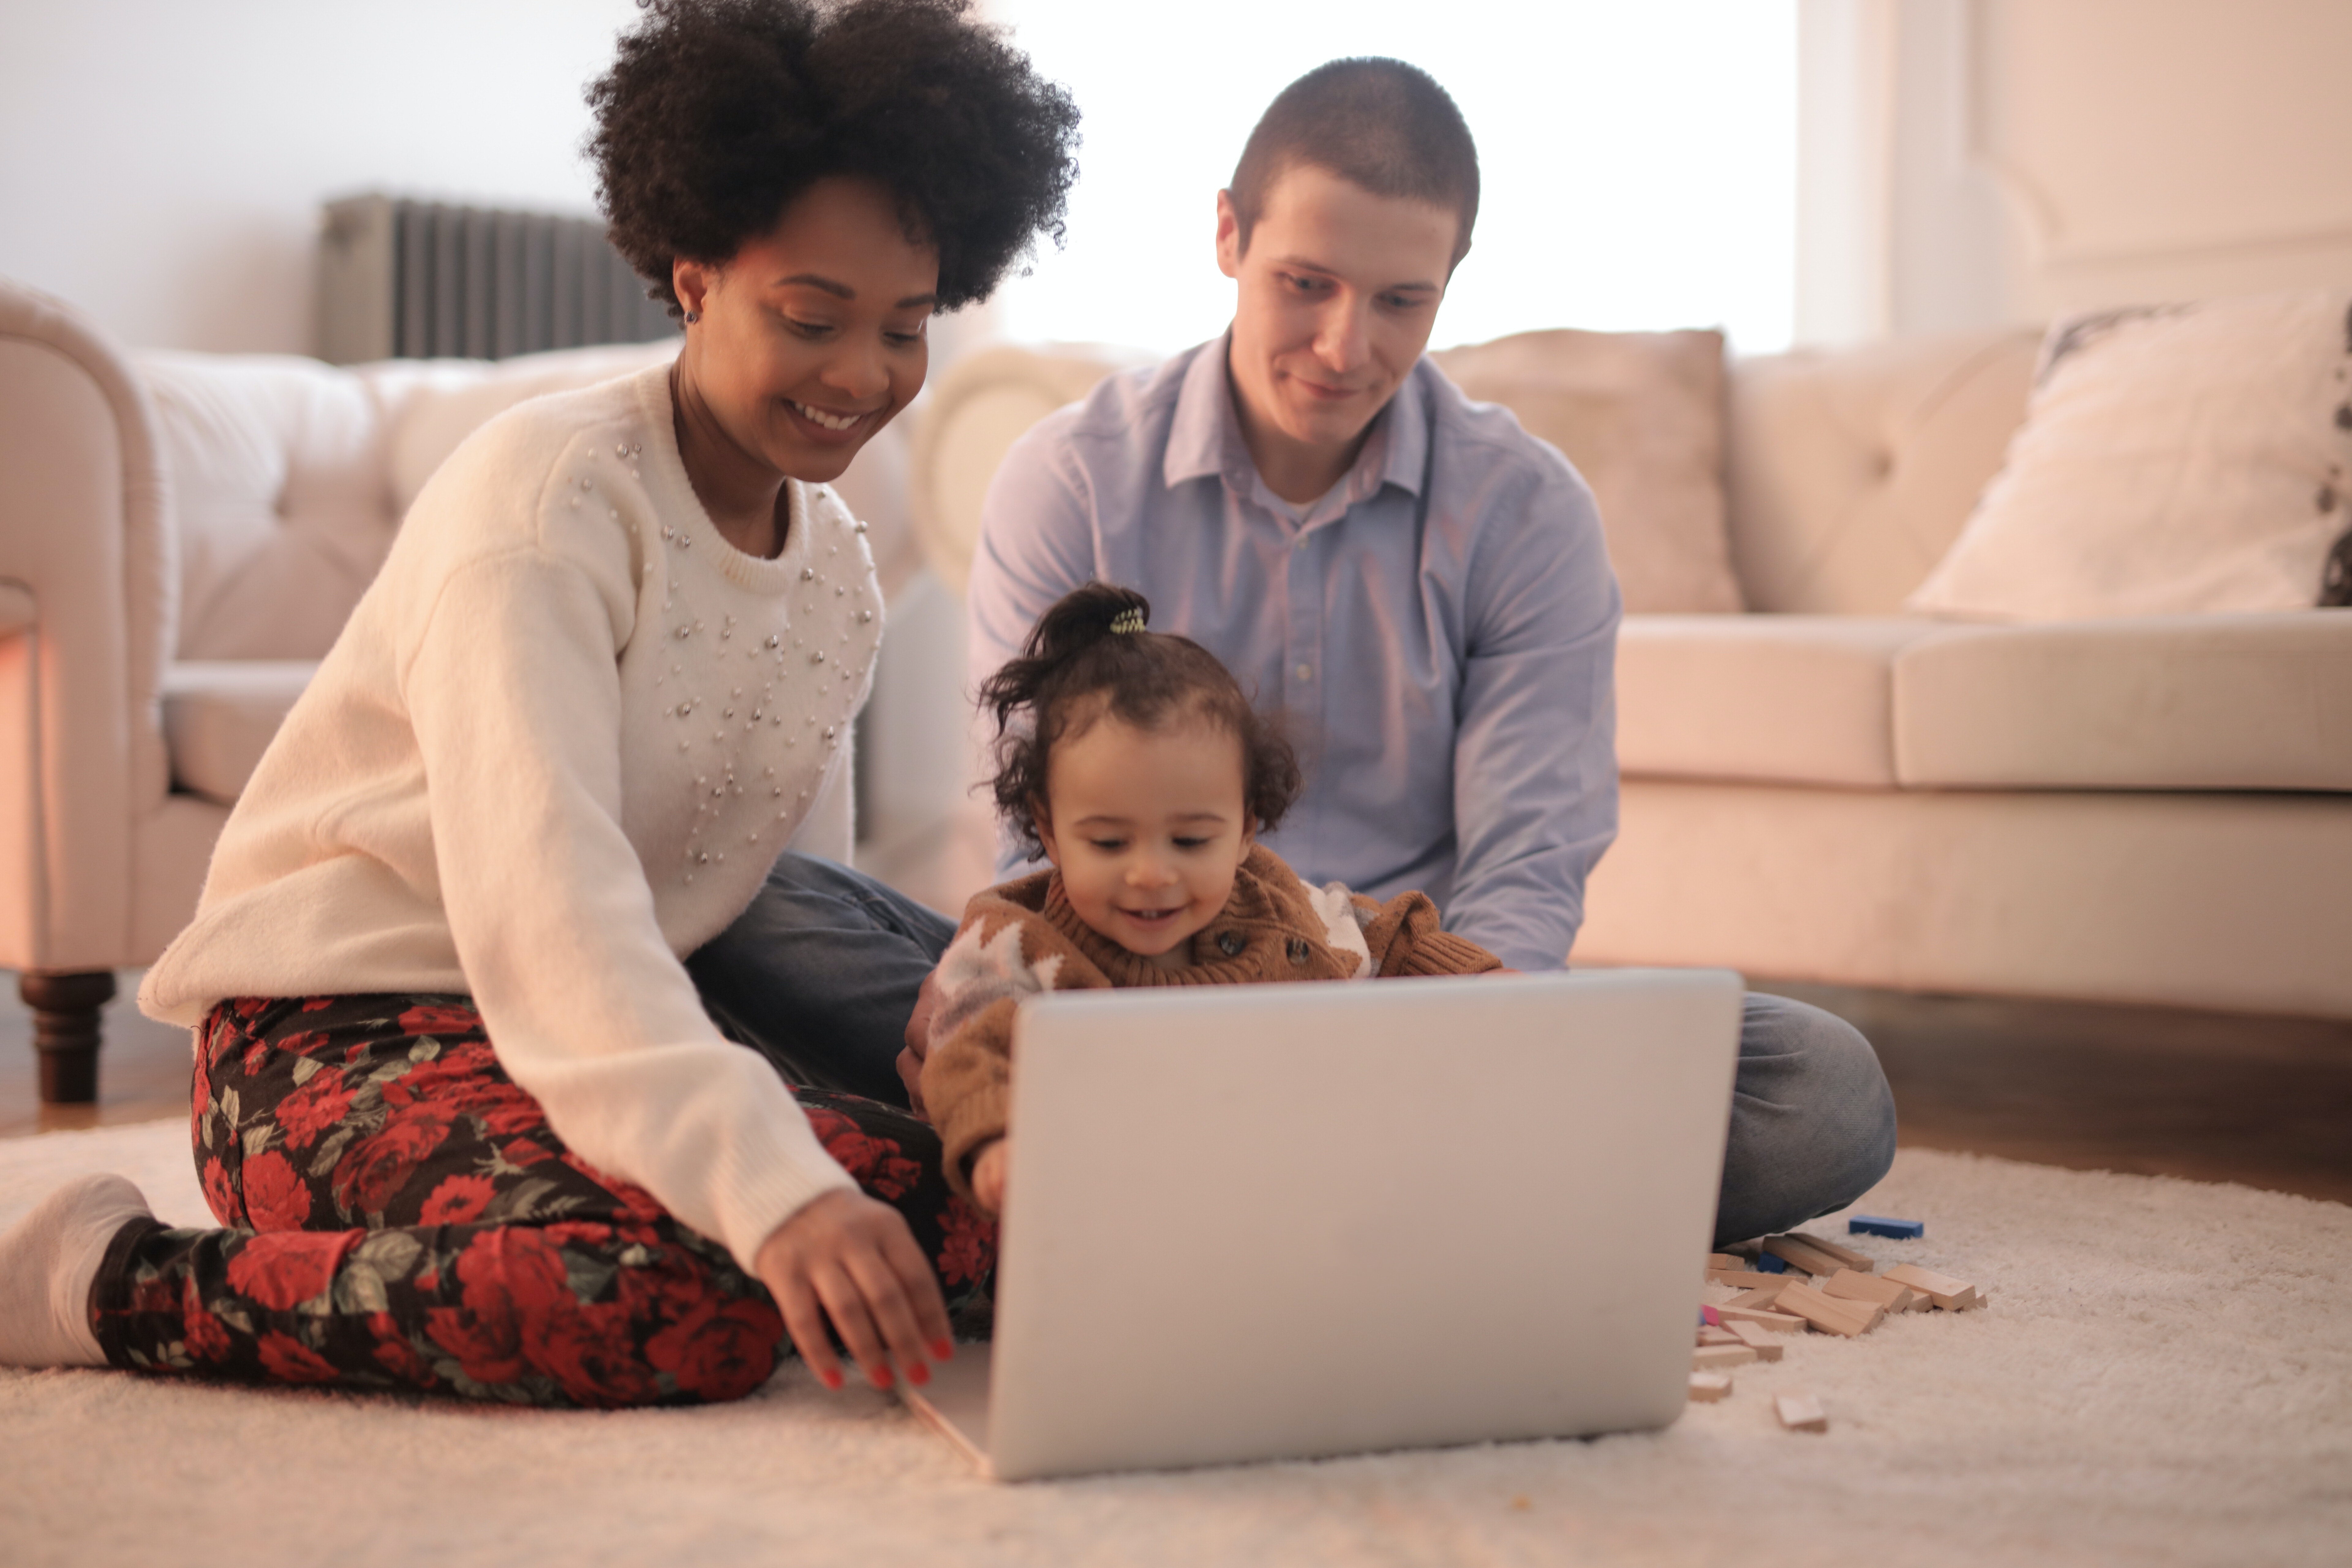 Two parents sit on the floor with a baby. The mother points and smiles at a laptop that is on the floor.